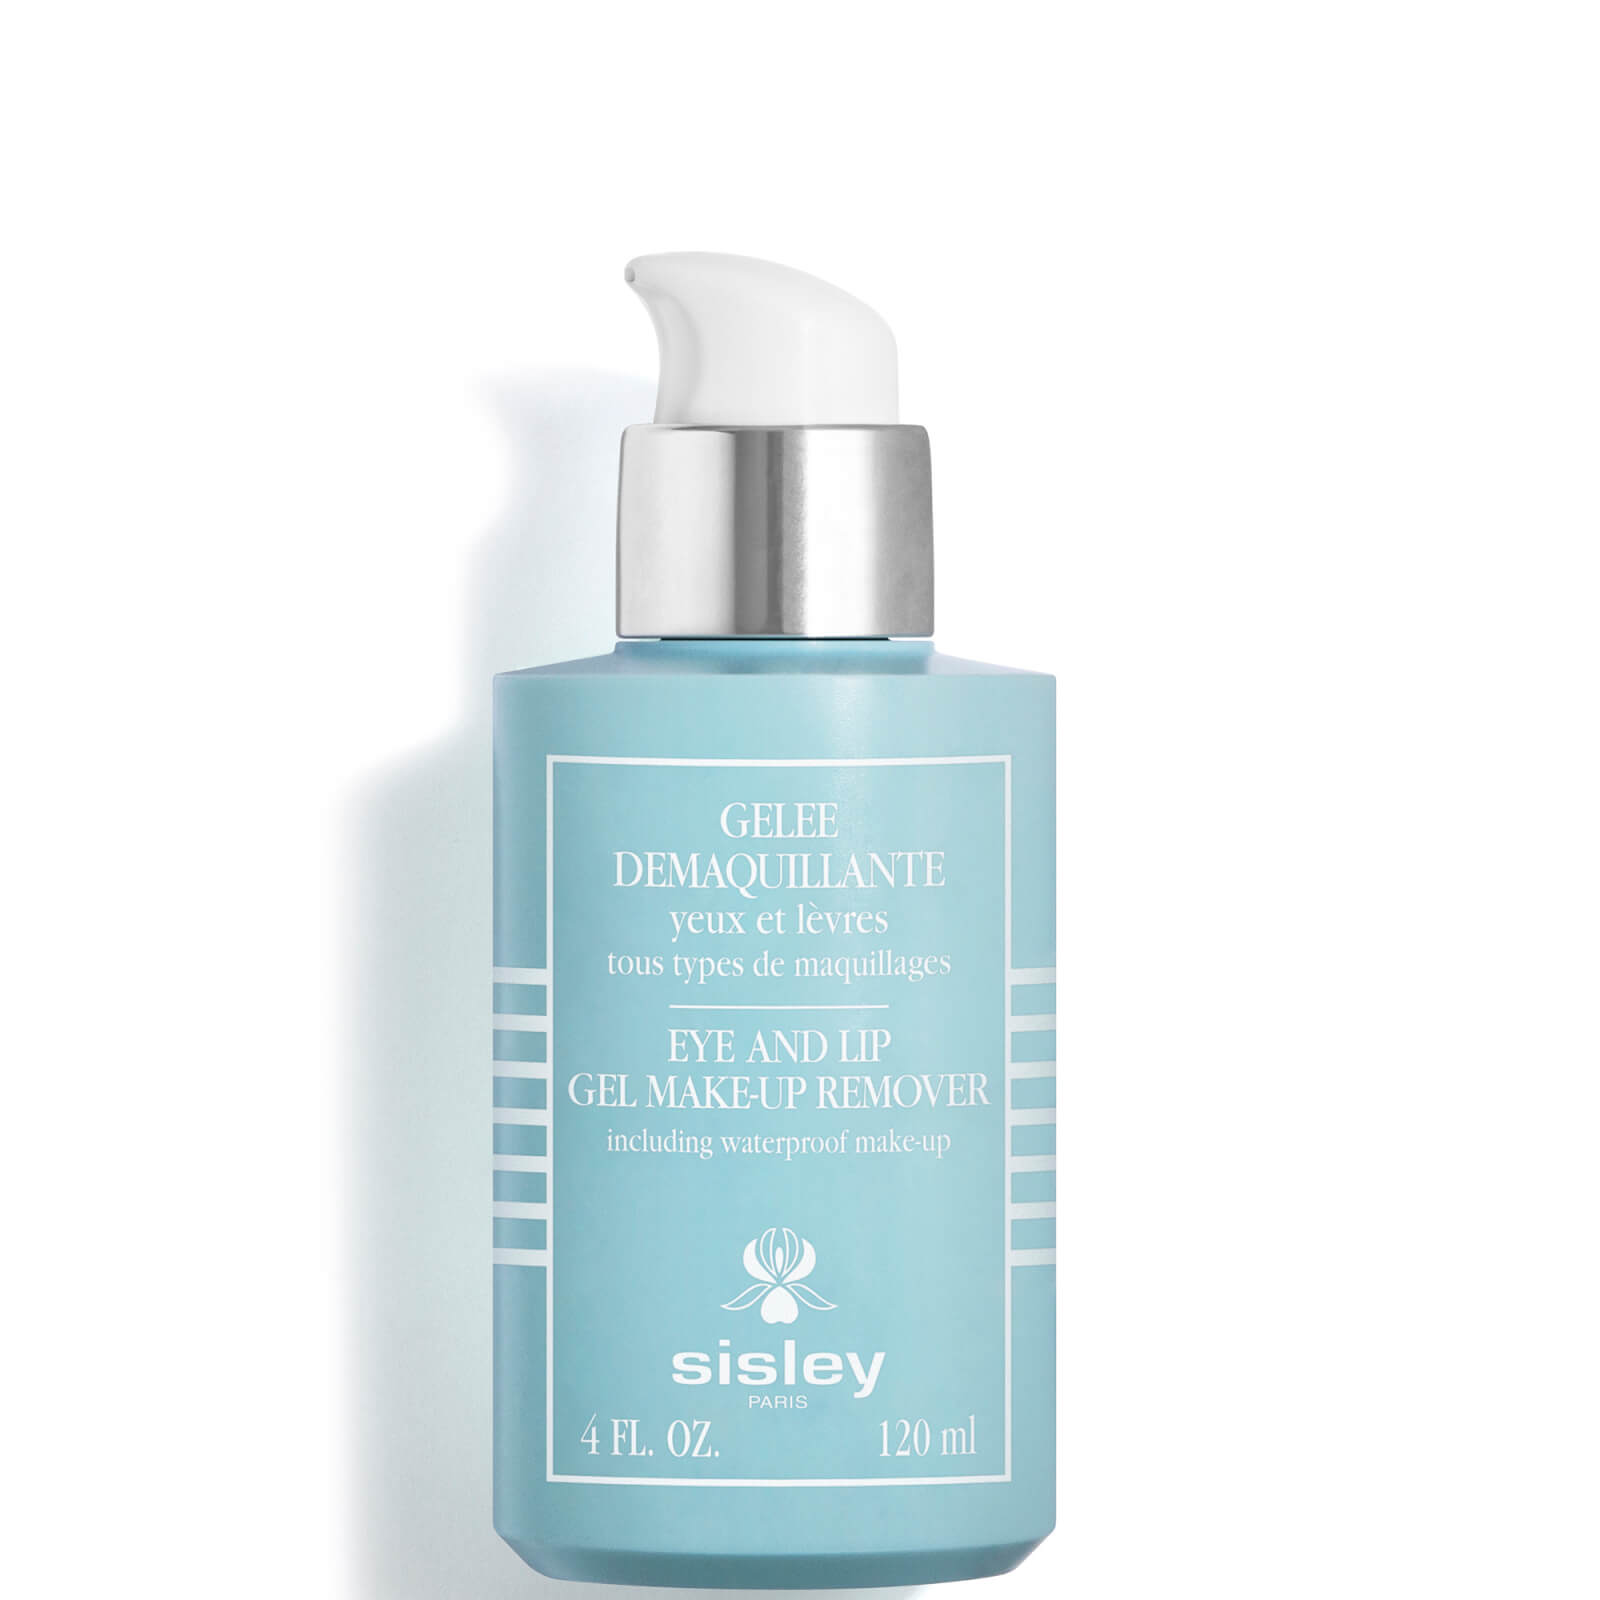 Photos - Facial / Body Cleansing Product Sisley PARIS Eye and Lip Gel Make-up Remover 120ml 